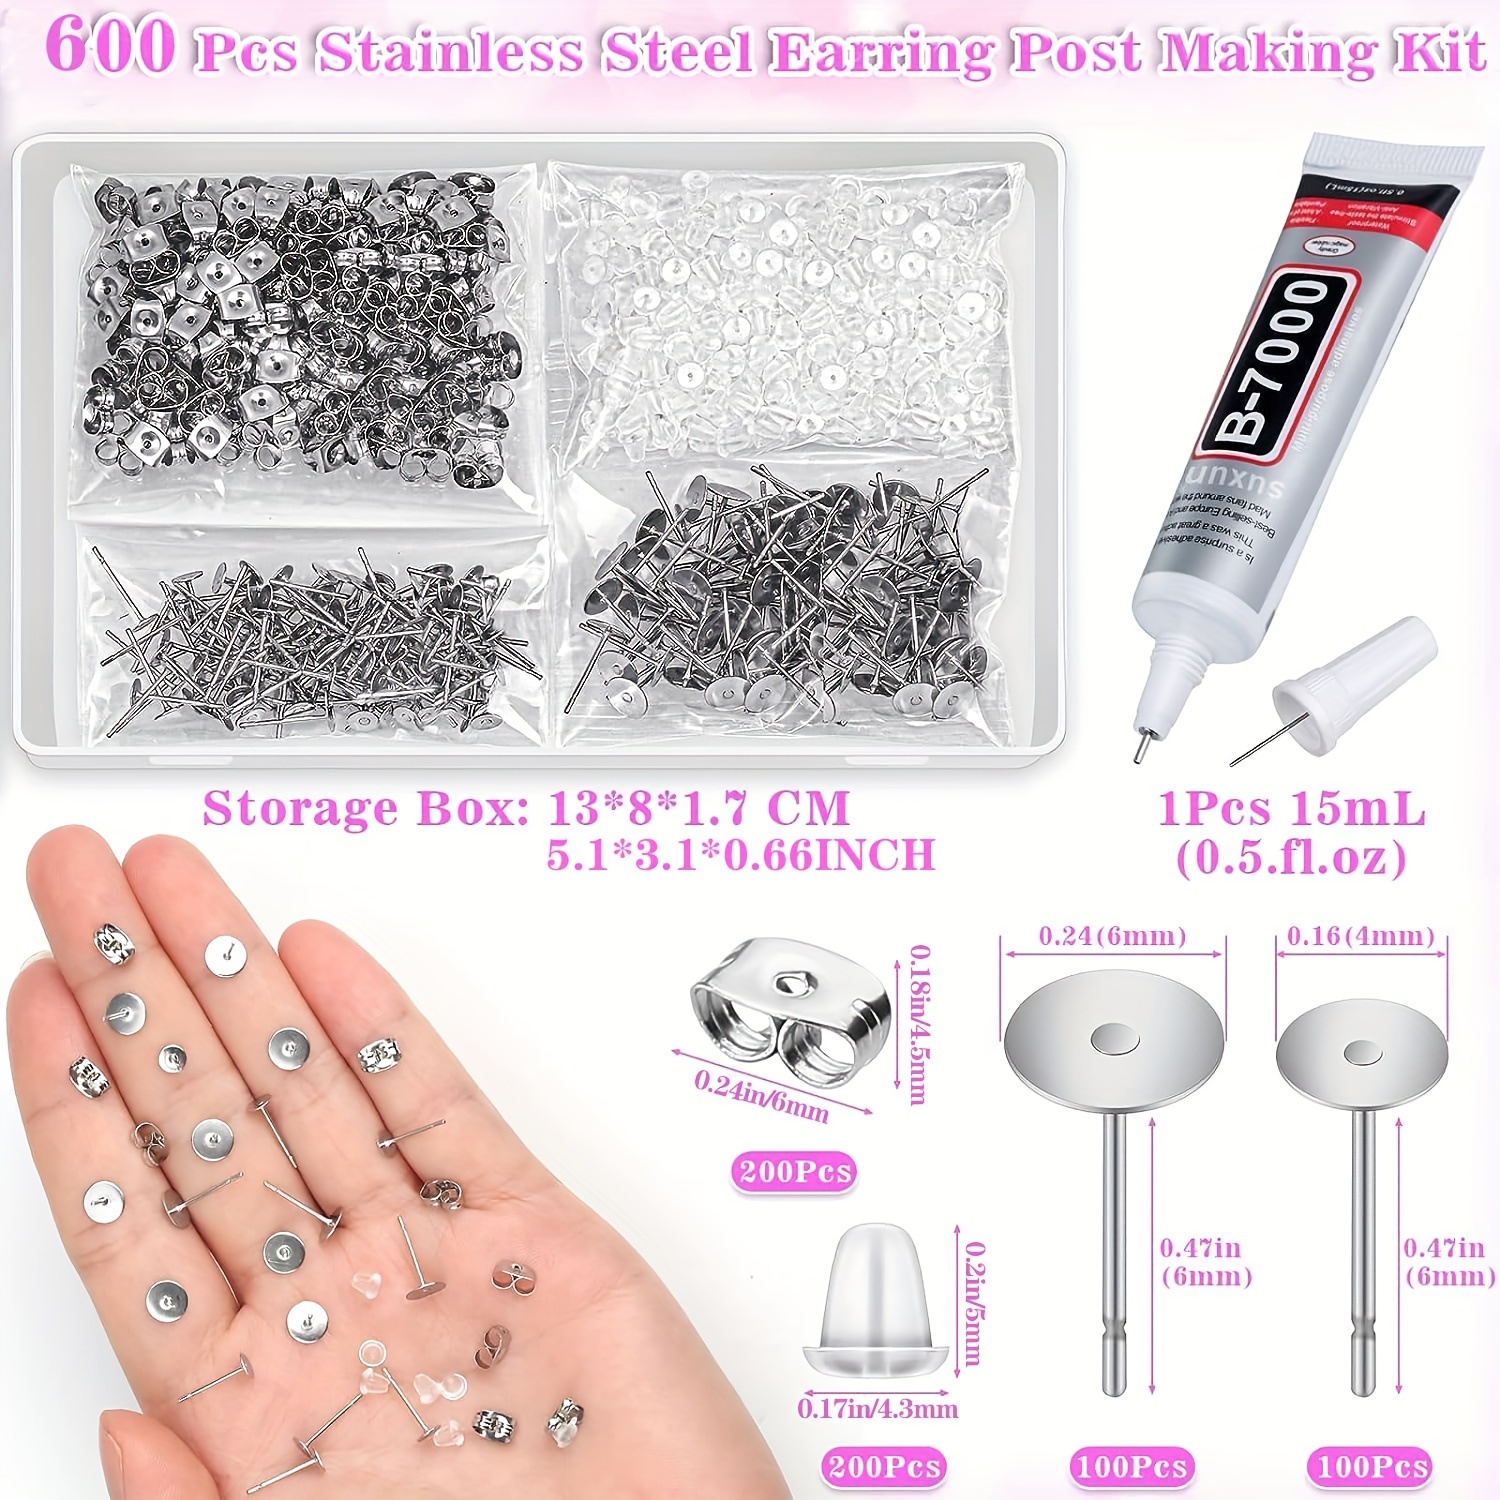 600 PCS 5MM Hypoallergenic Stainless Steel Earrings Posts Flat Pad